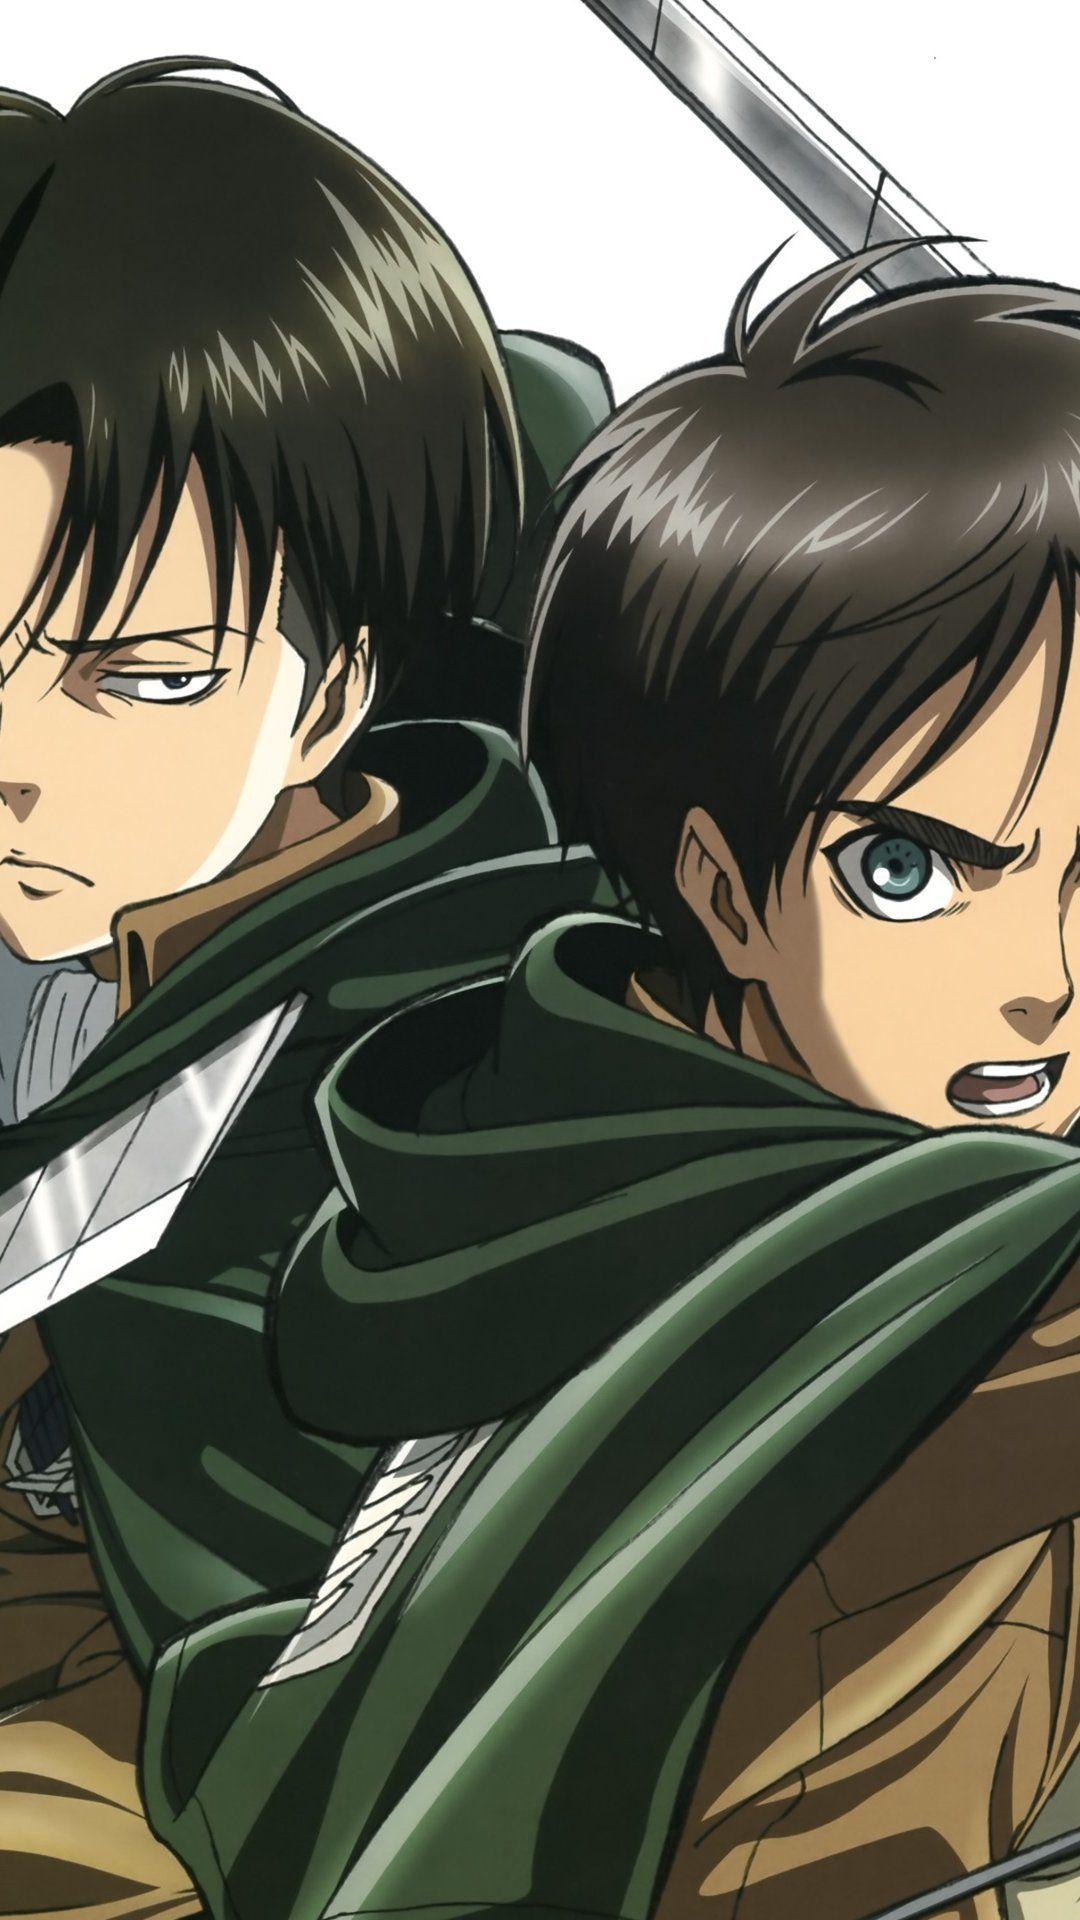 Eren Jaeger and Rivaille 1080x1920 mobile wallpaper (9480)